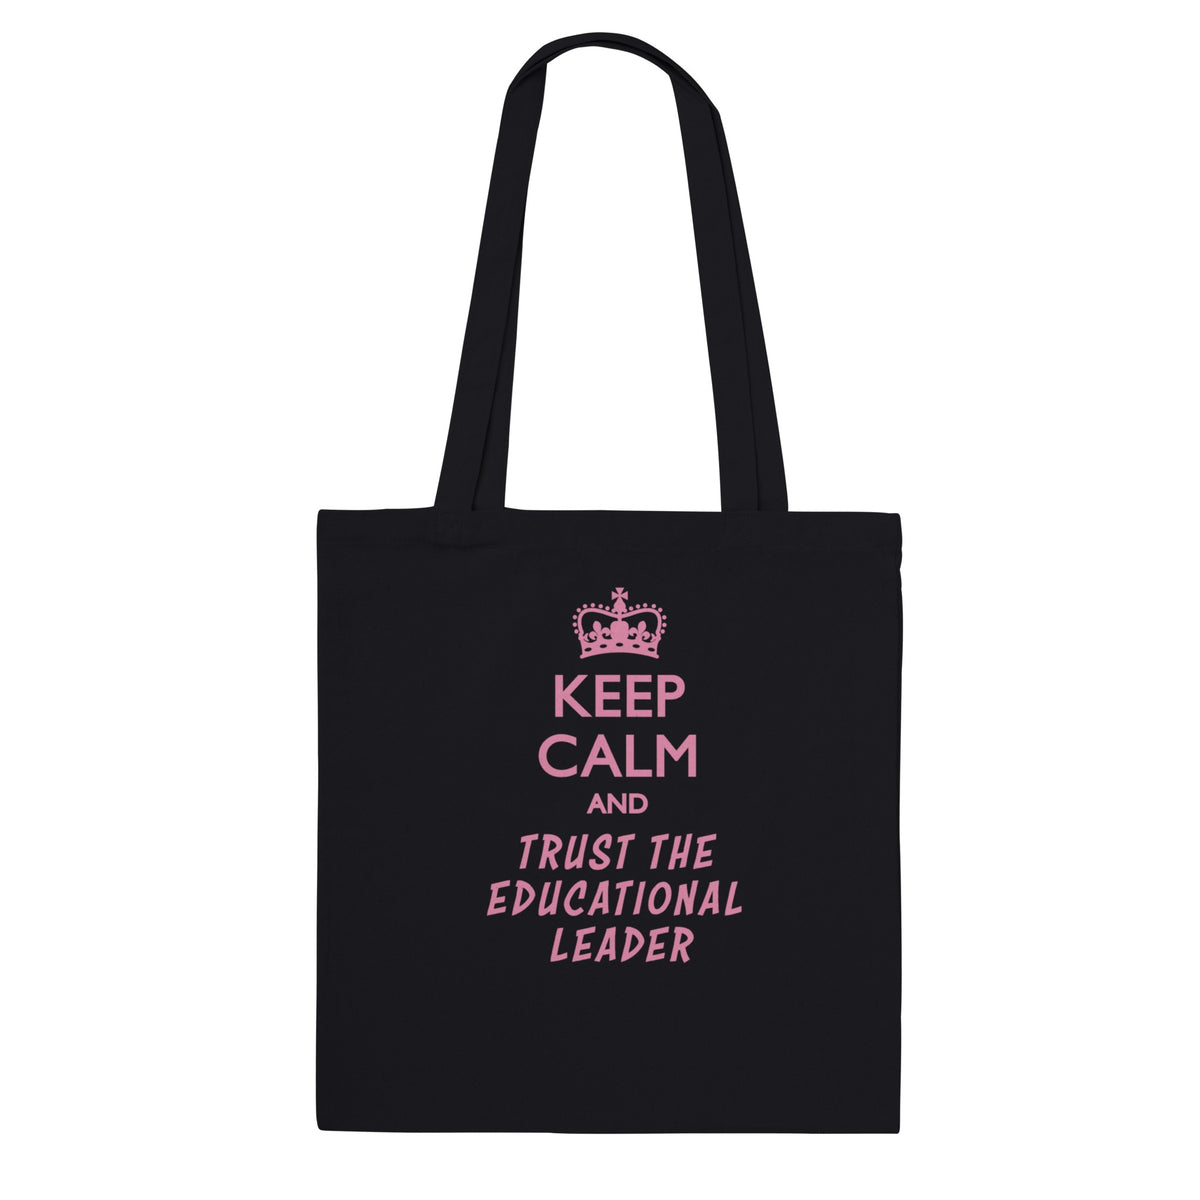 Premium Tote Bag - Keep Calm and Trust the Educational Leader